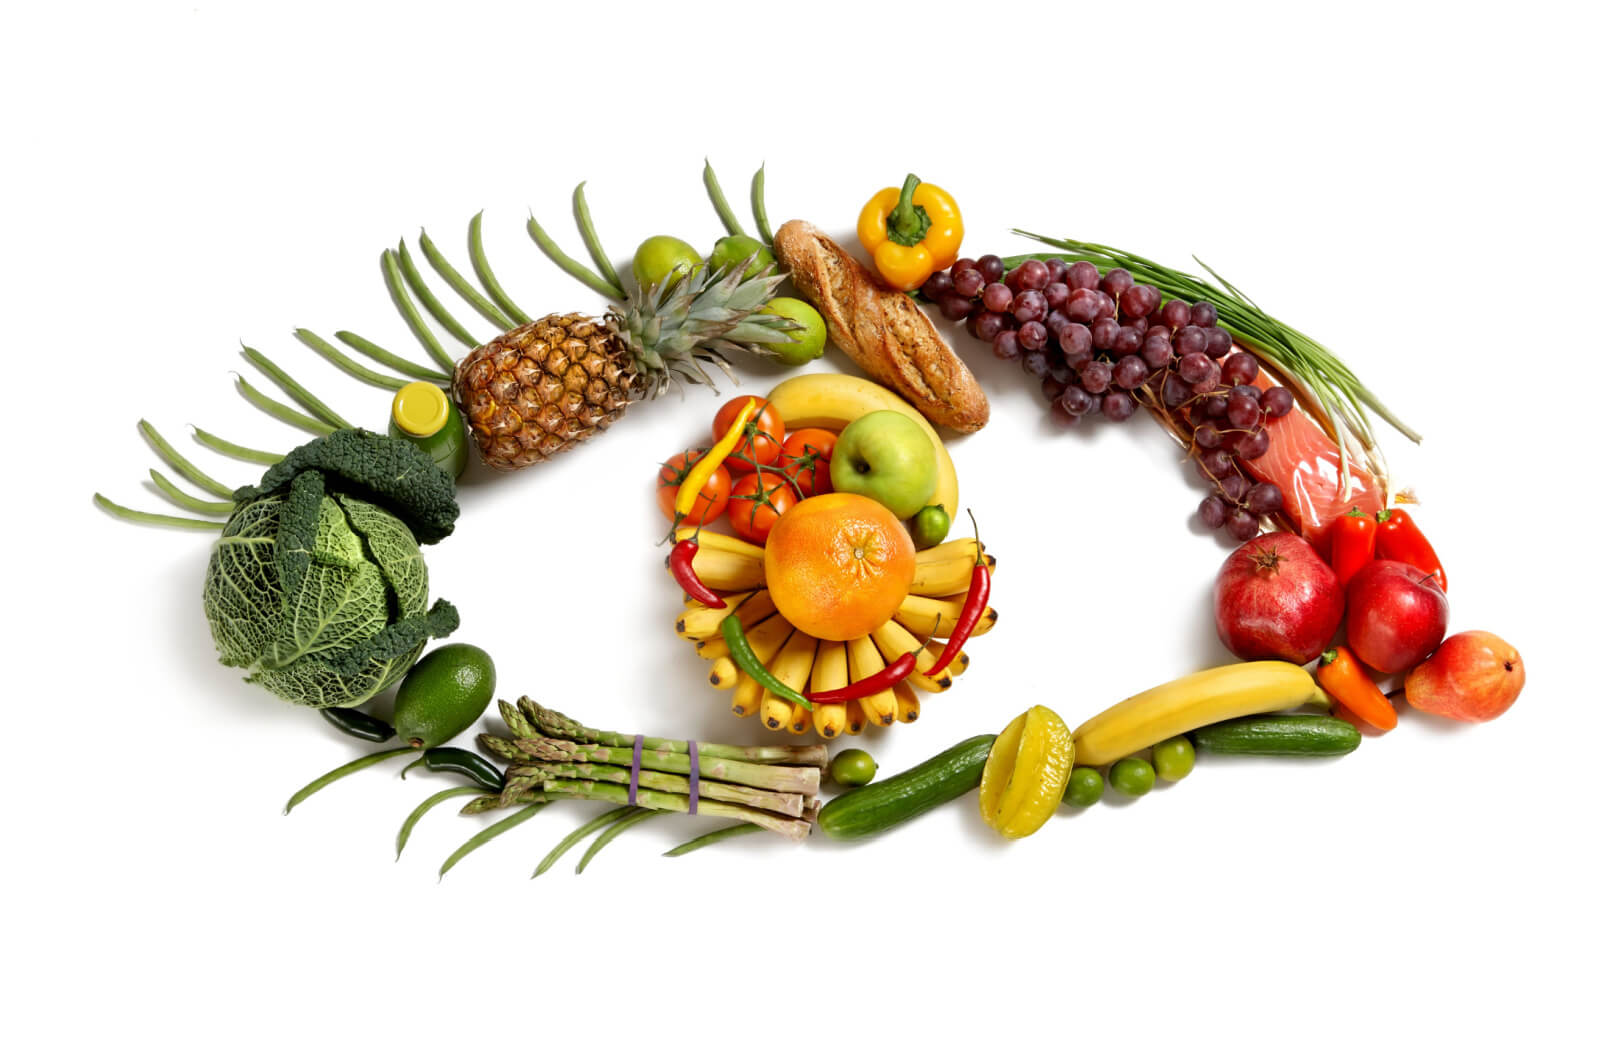 An assortment of fruits, vegetables, and fish arranged in the shape of an eye represents a natural source of vitamins essential for eye health.